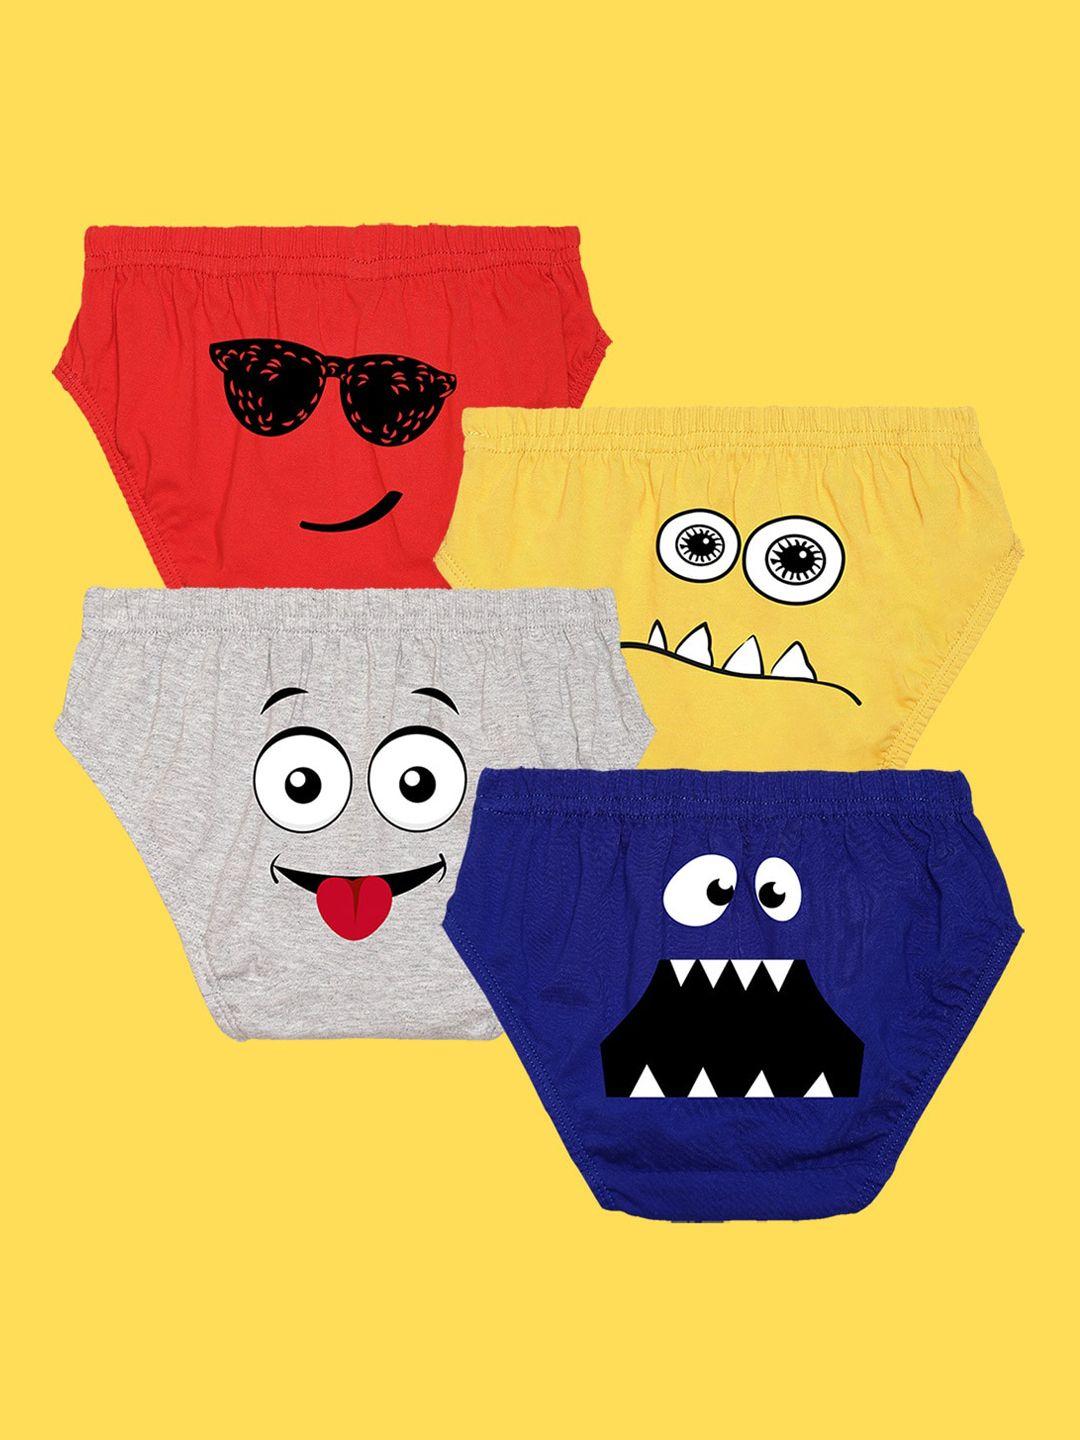 nusyl boys pack of 4 assorted pure cotton anti-bacterial basic briefs